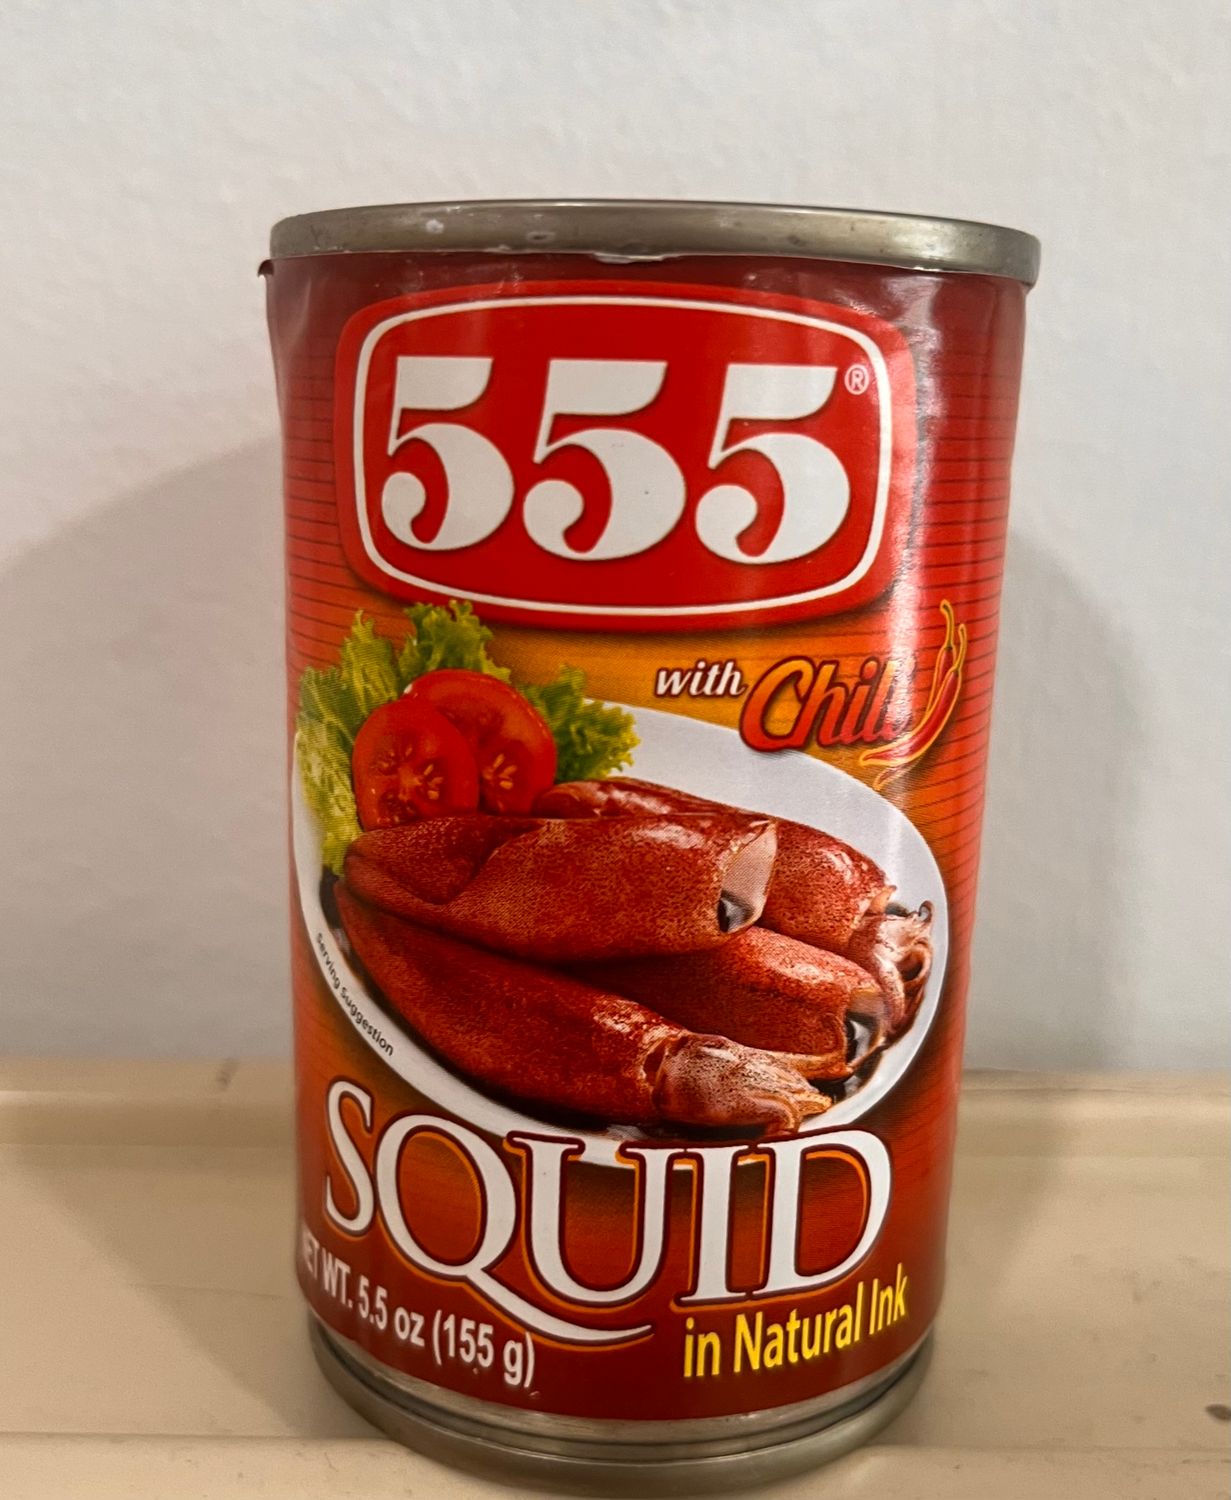 555 Squid In Natural Ink With Chili